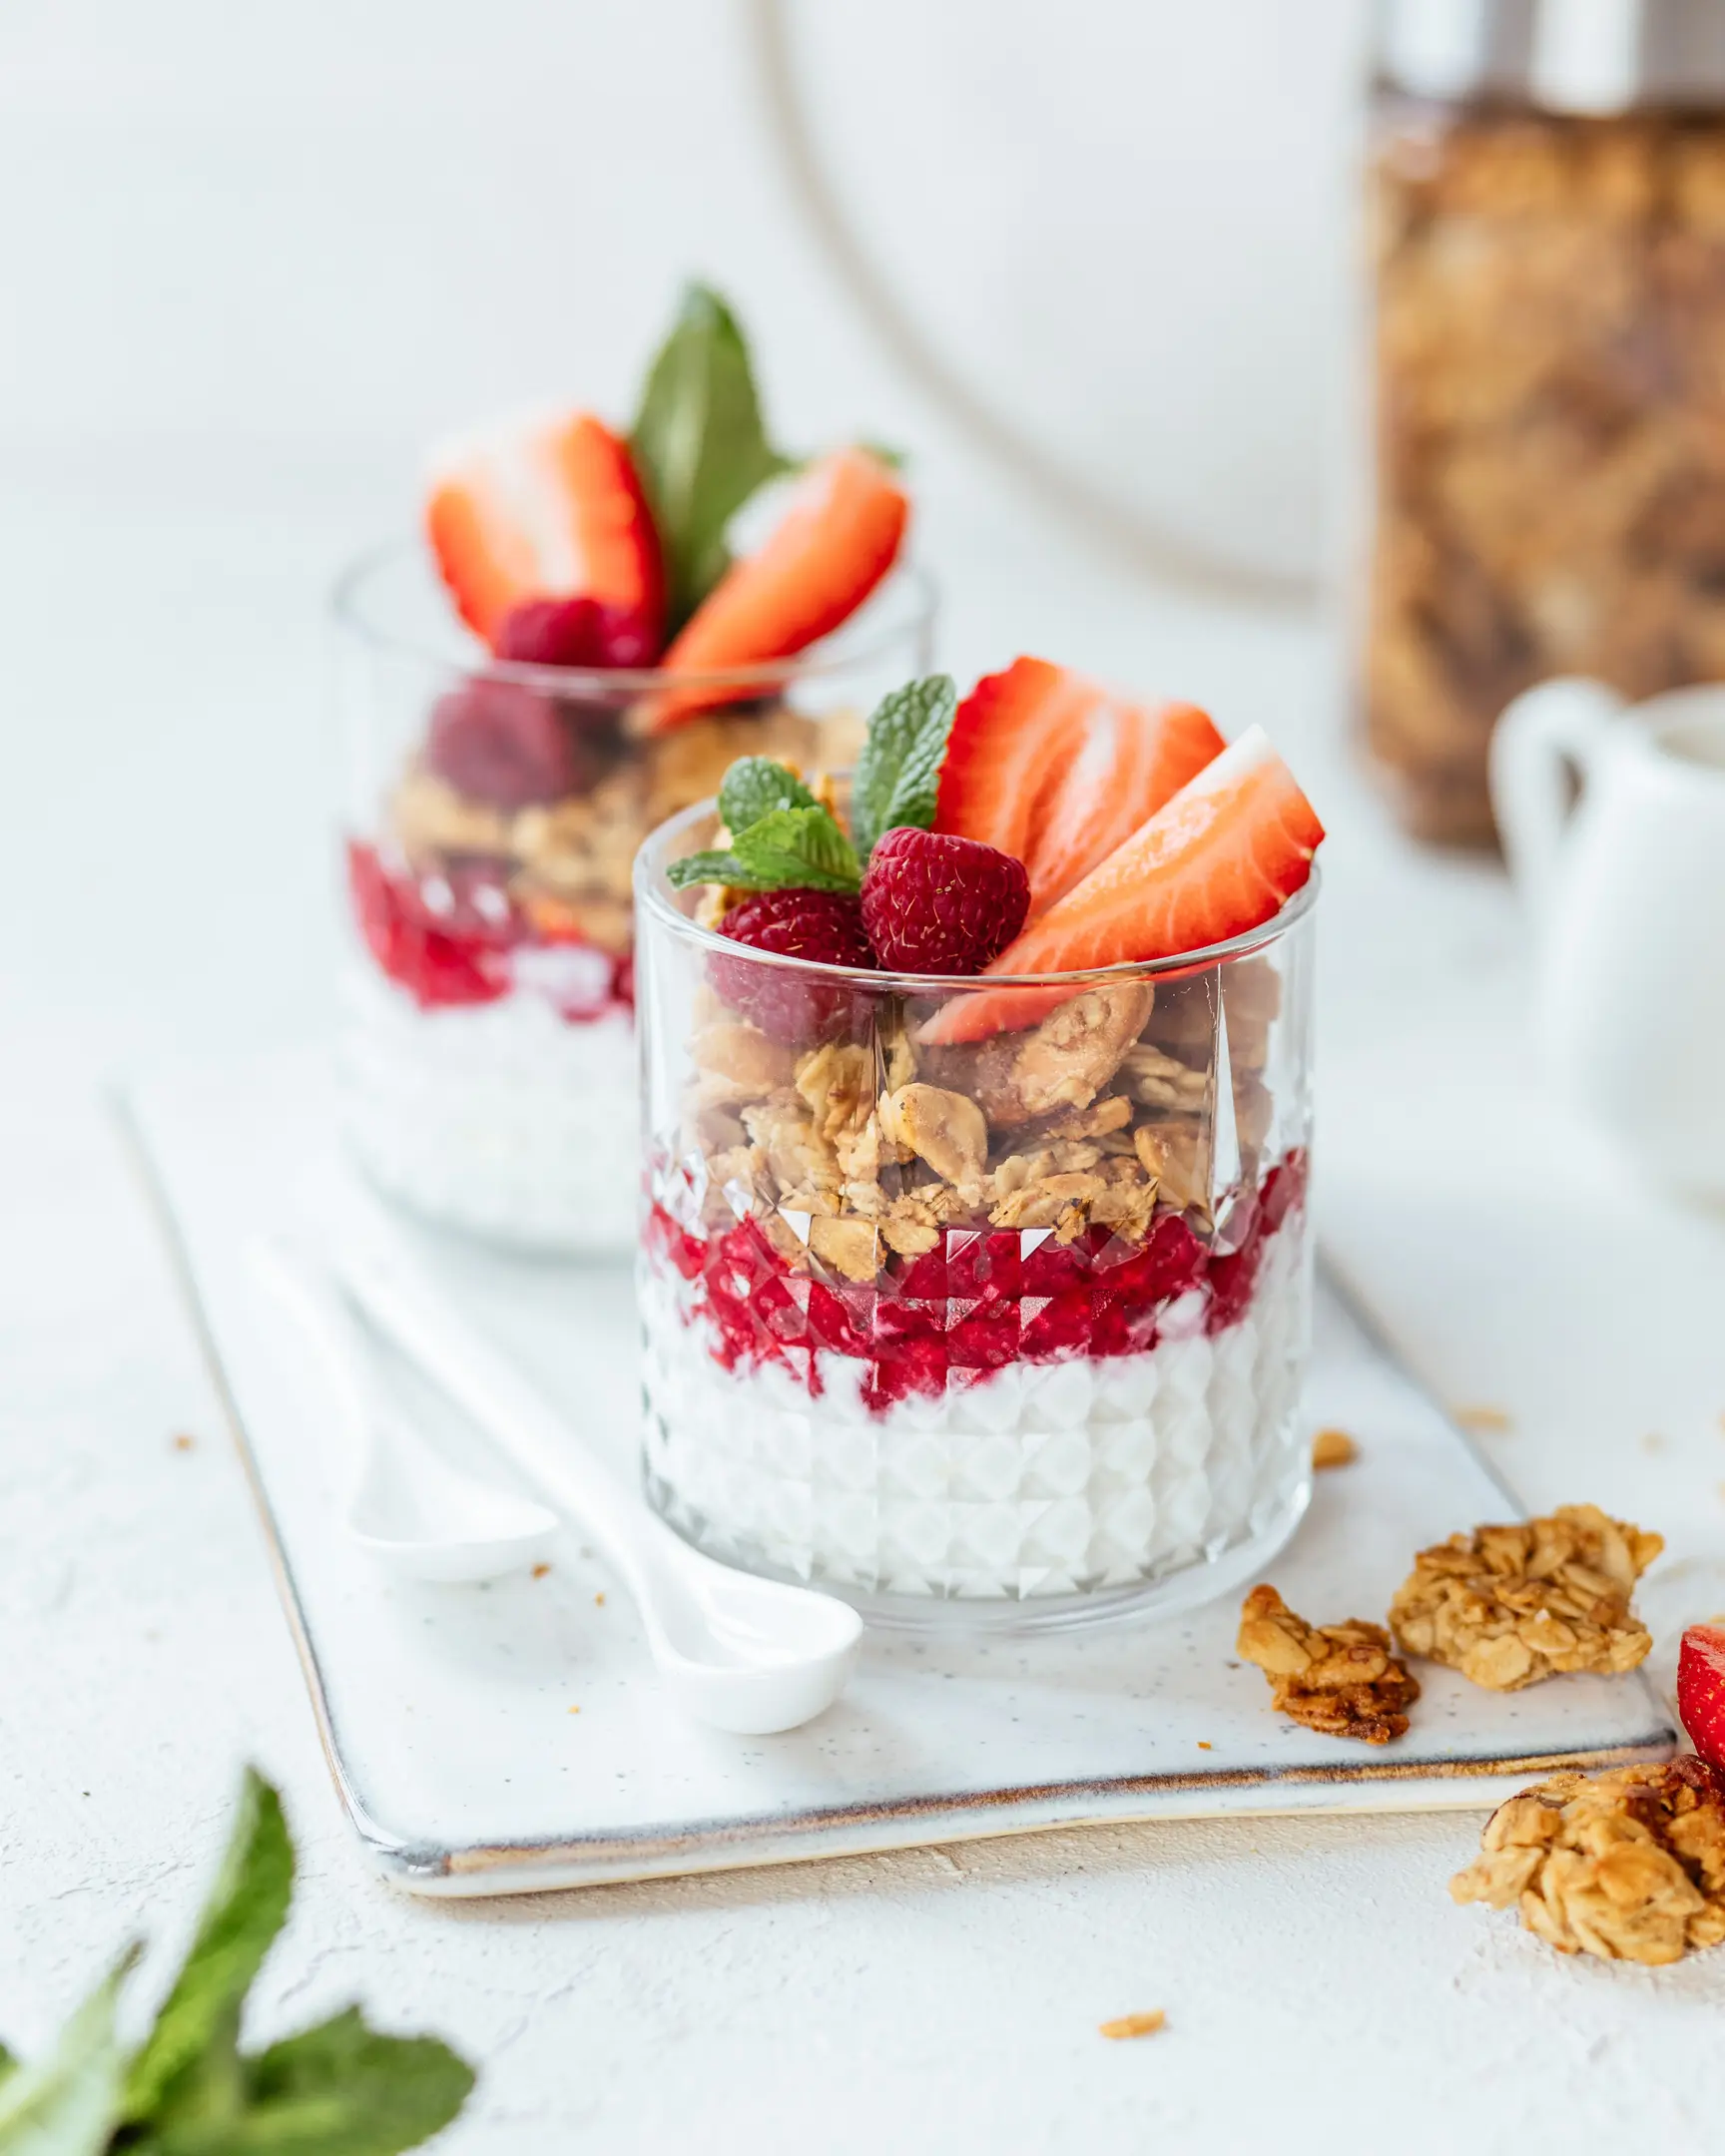 On a light background are 2 cups of yogurt and granola.  On a light background are 2 cups of yogurt and granola. They are filled with granola. The dessert is decorated with strawberries. In the background is a large can of granola.